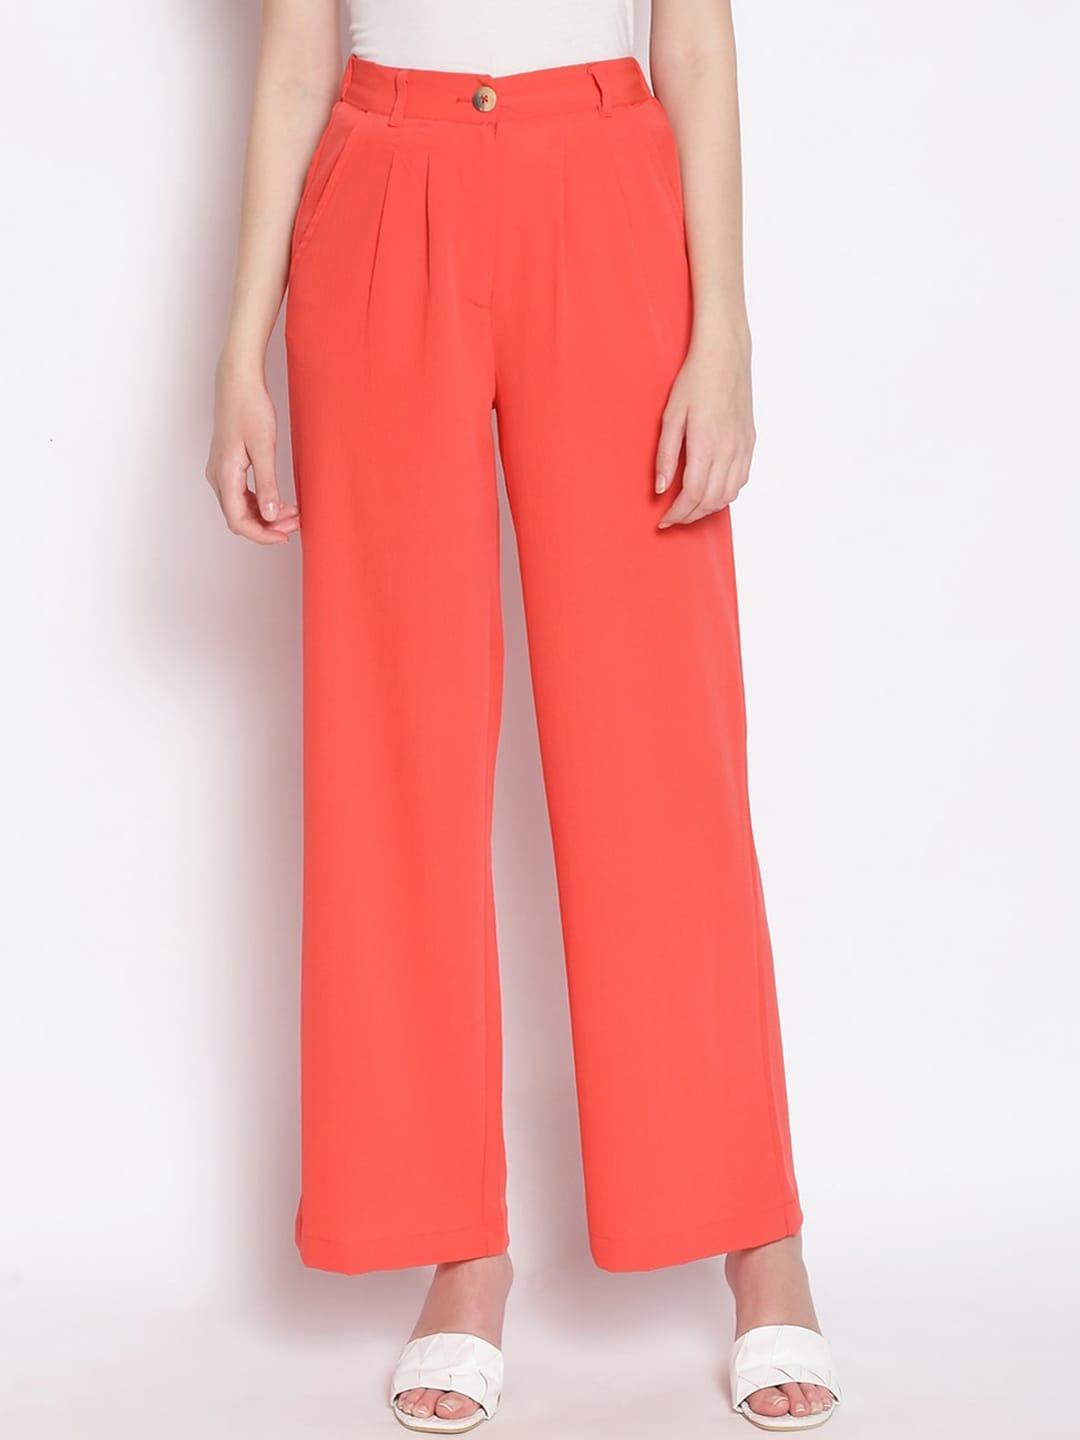 oxolloxo-women-orange-solid-pleated-parallel-trousers